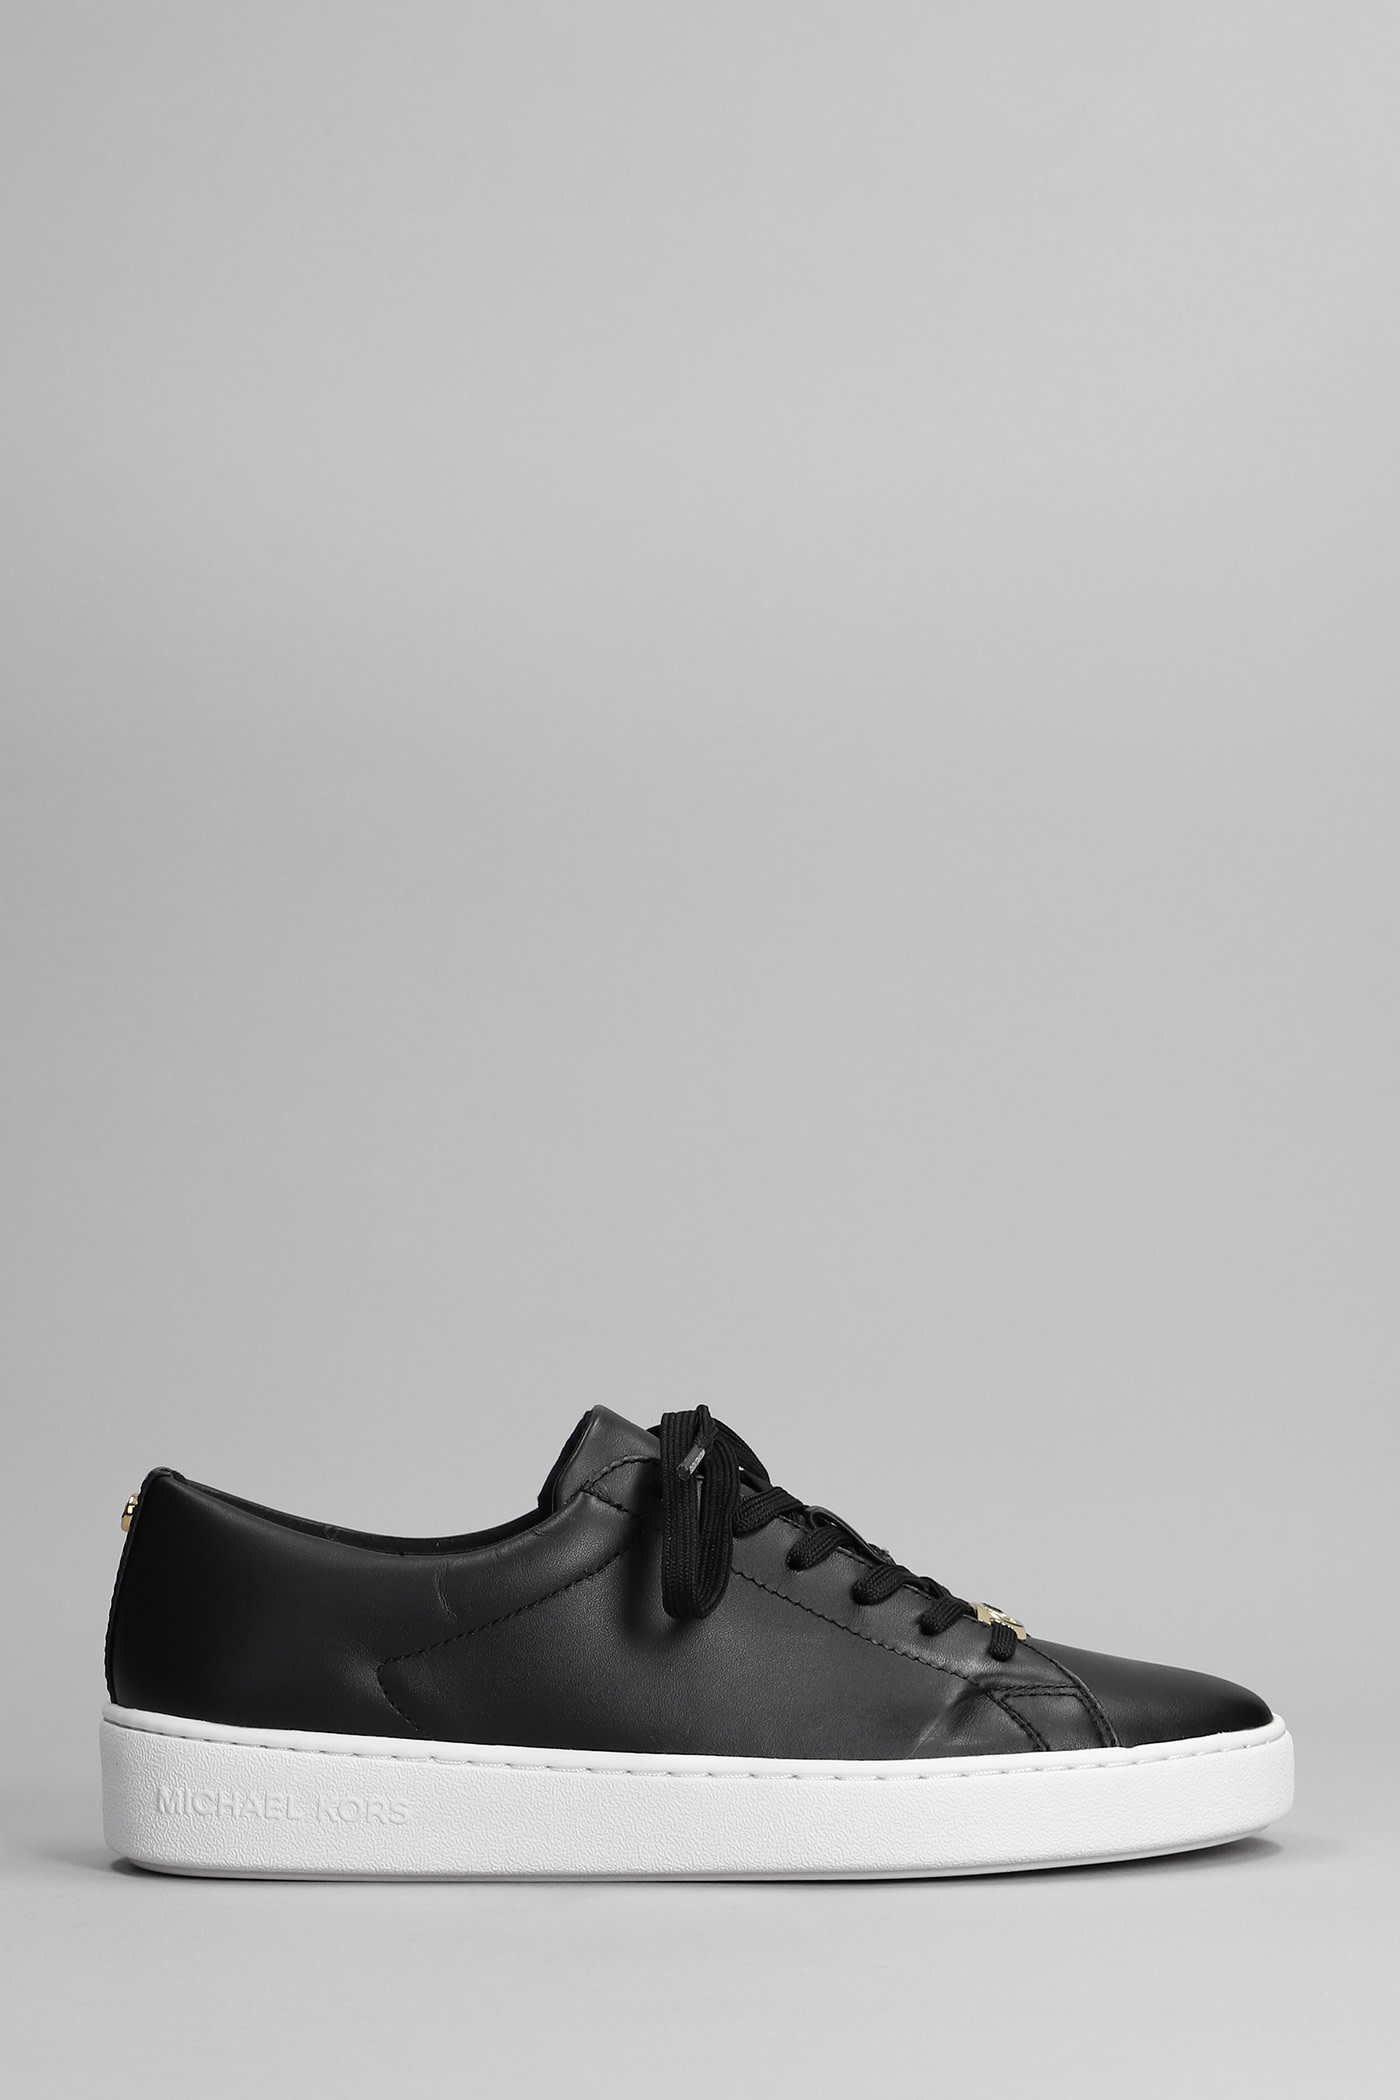 Michael Kors Keaton Lace Up Sneakers In Black Leather